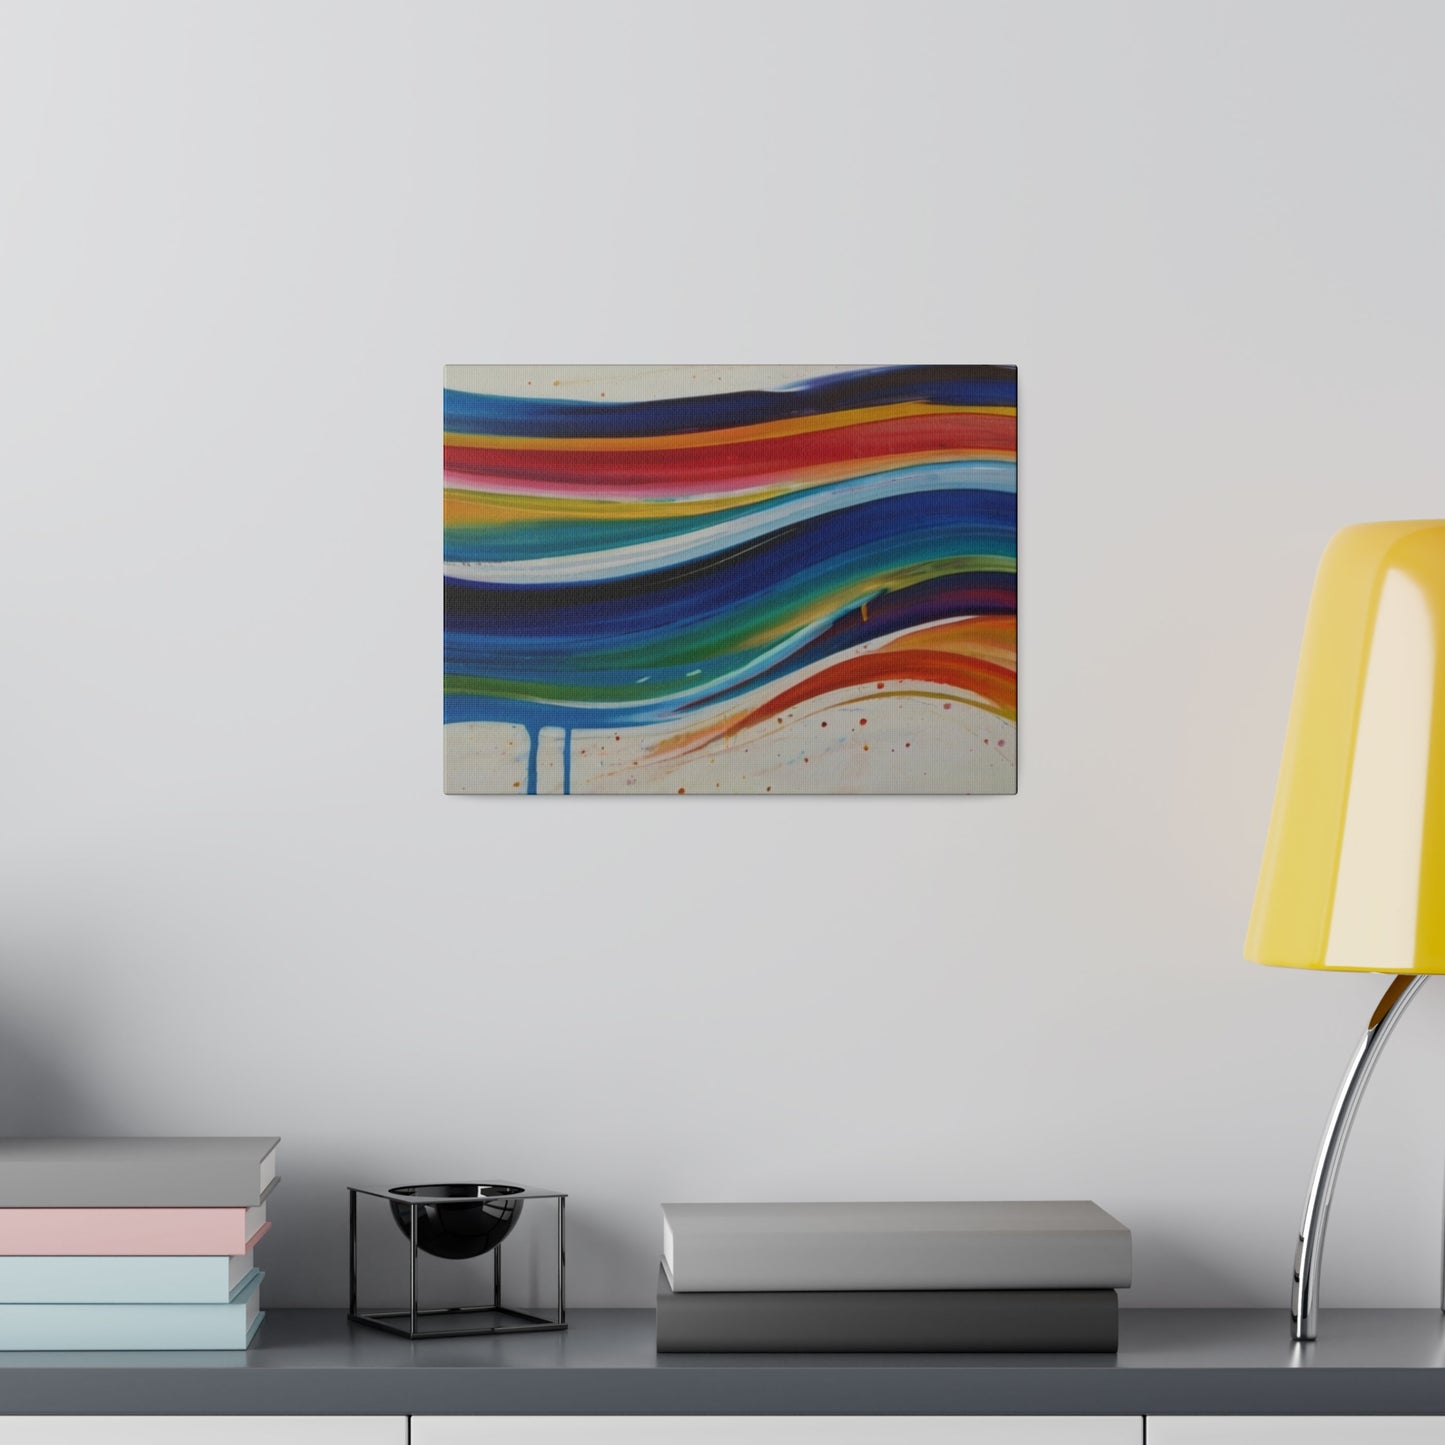 Messy Colourful Wavey Lines Artwork - Matte Canvas, Stretched, 0.75"